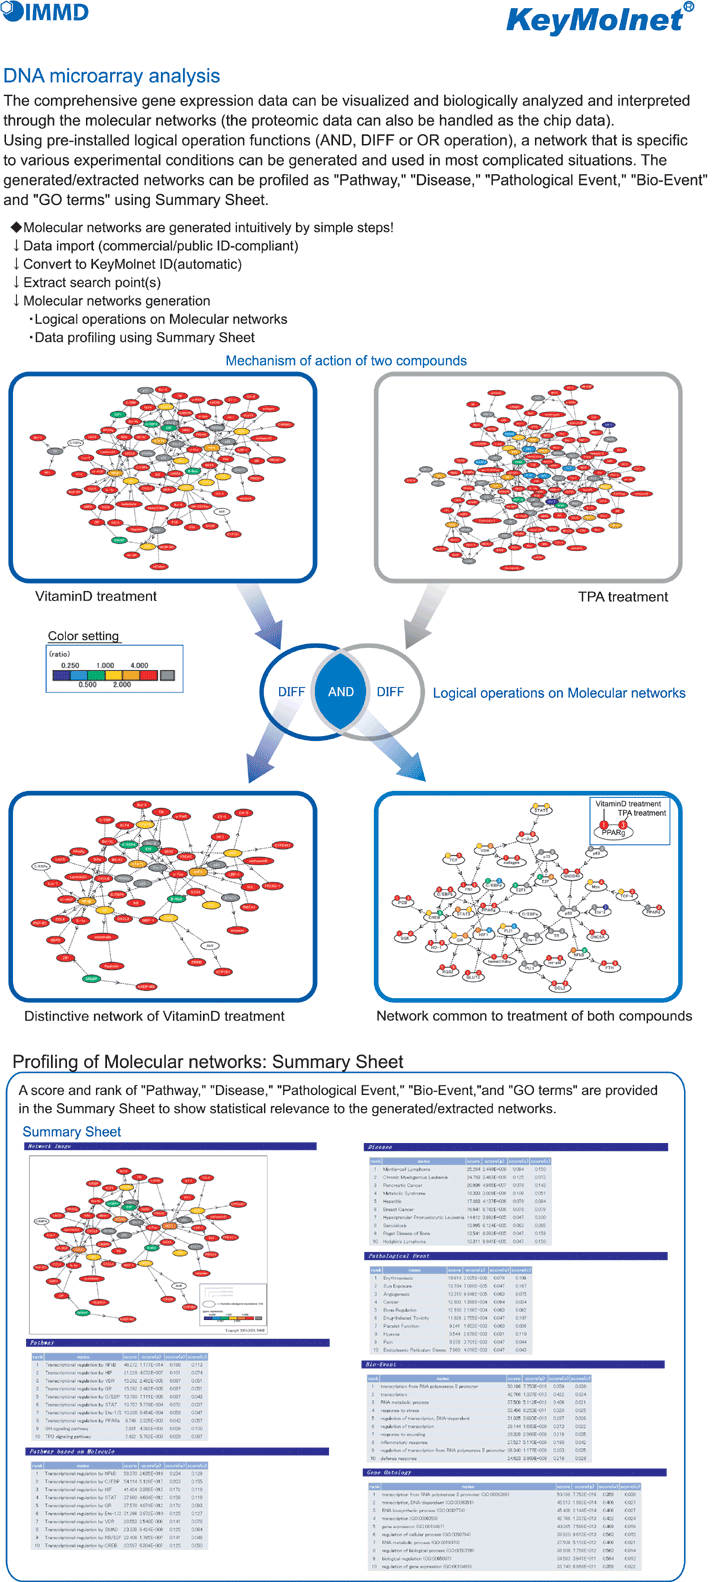 The comprehensive gene expression data can be visualized and biologically analyzed and interpreted through the molecular networks (the proteomic data can also be handled as the chip data). Using pre-installed logical operation functions (AND, DIFF or OR operation), a network that is specific to various experimental conditions can be generated and used in most complicated situations. The generated/extracted networks can be profiled as gPathway,hgDisease,hgPathological Event,h gBio-Eventh and gGO termsh using Summary Sheet.Molecular networks are generated intuitively by simple steps!Data import (commercial/public ID-compliant)Convert to KeyMolnet ID(automatic)Extract search point(s)Molecular networks generation Logical operations on Molecular networks Data profiling using Summary Sheet Profiling of Molecular networks: Summary Sheet A score and rank of gPathway,hgDisease,hgPathological Event,hgBio-Event,hand gGO termsh are provided in the Summary Sheet to show statistical relevance to the generated/extracted networks.